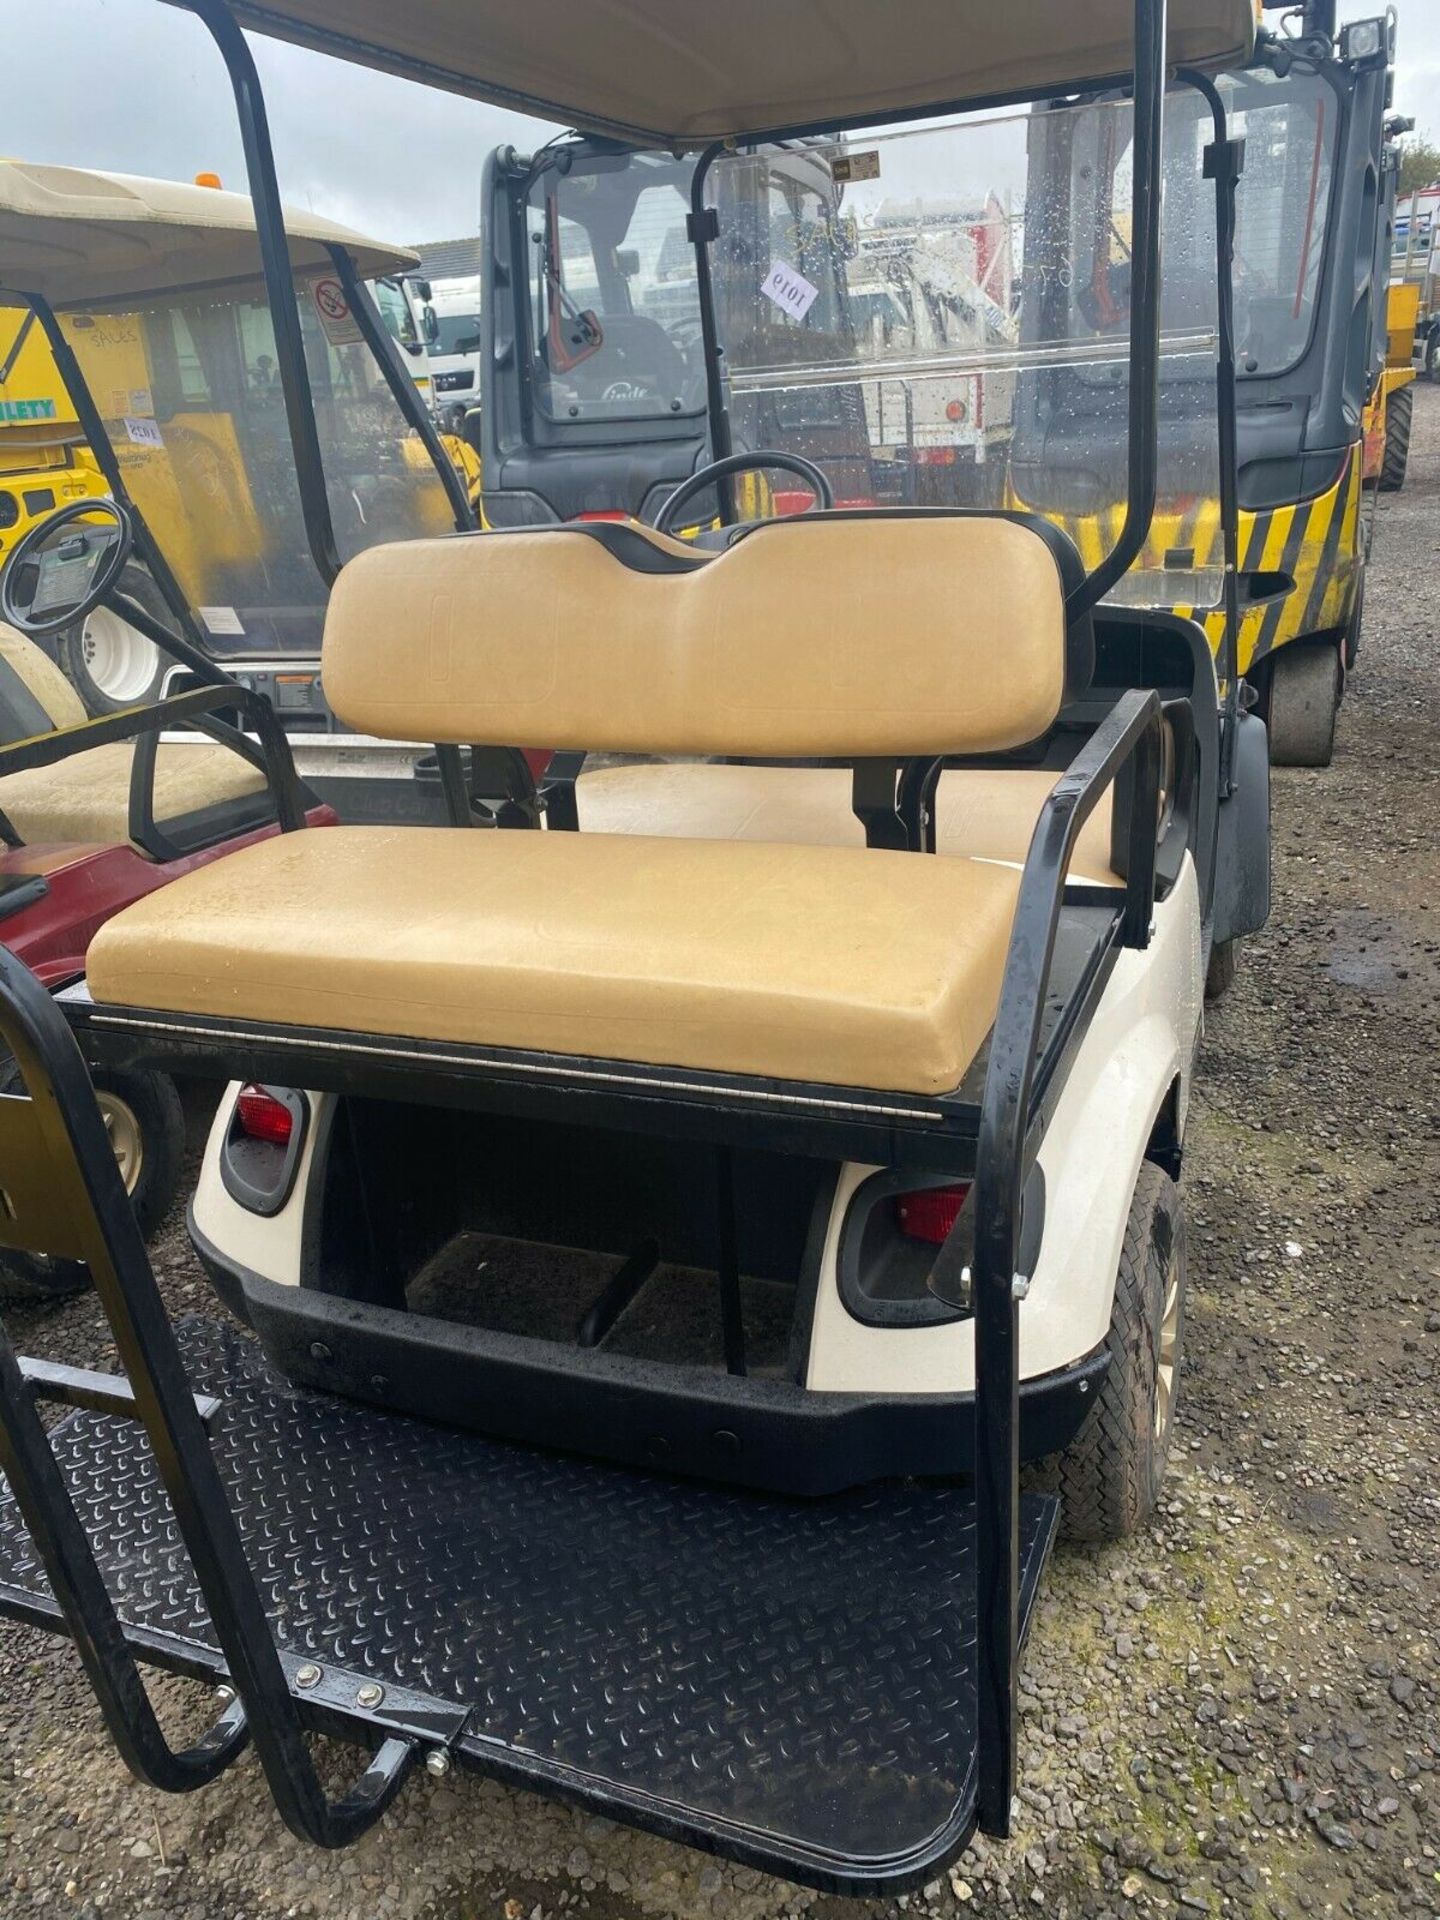 GOLF BUGGY CUSHMAN SHUTTLE 2 + 2, PETROL, 4 SEATER, ONLY 54 HOURS FROM NEW, PUCHASED NEW JUNE 2018 - Bild 9 aus 11